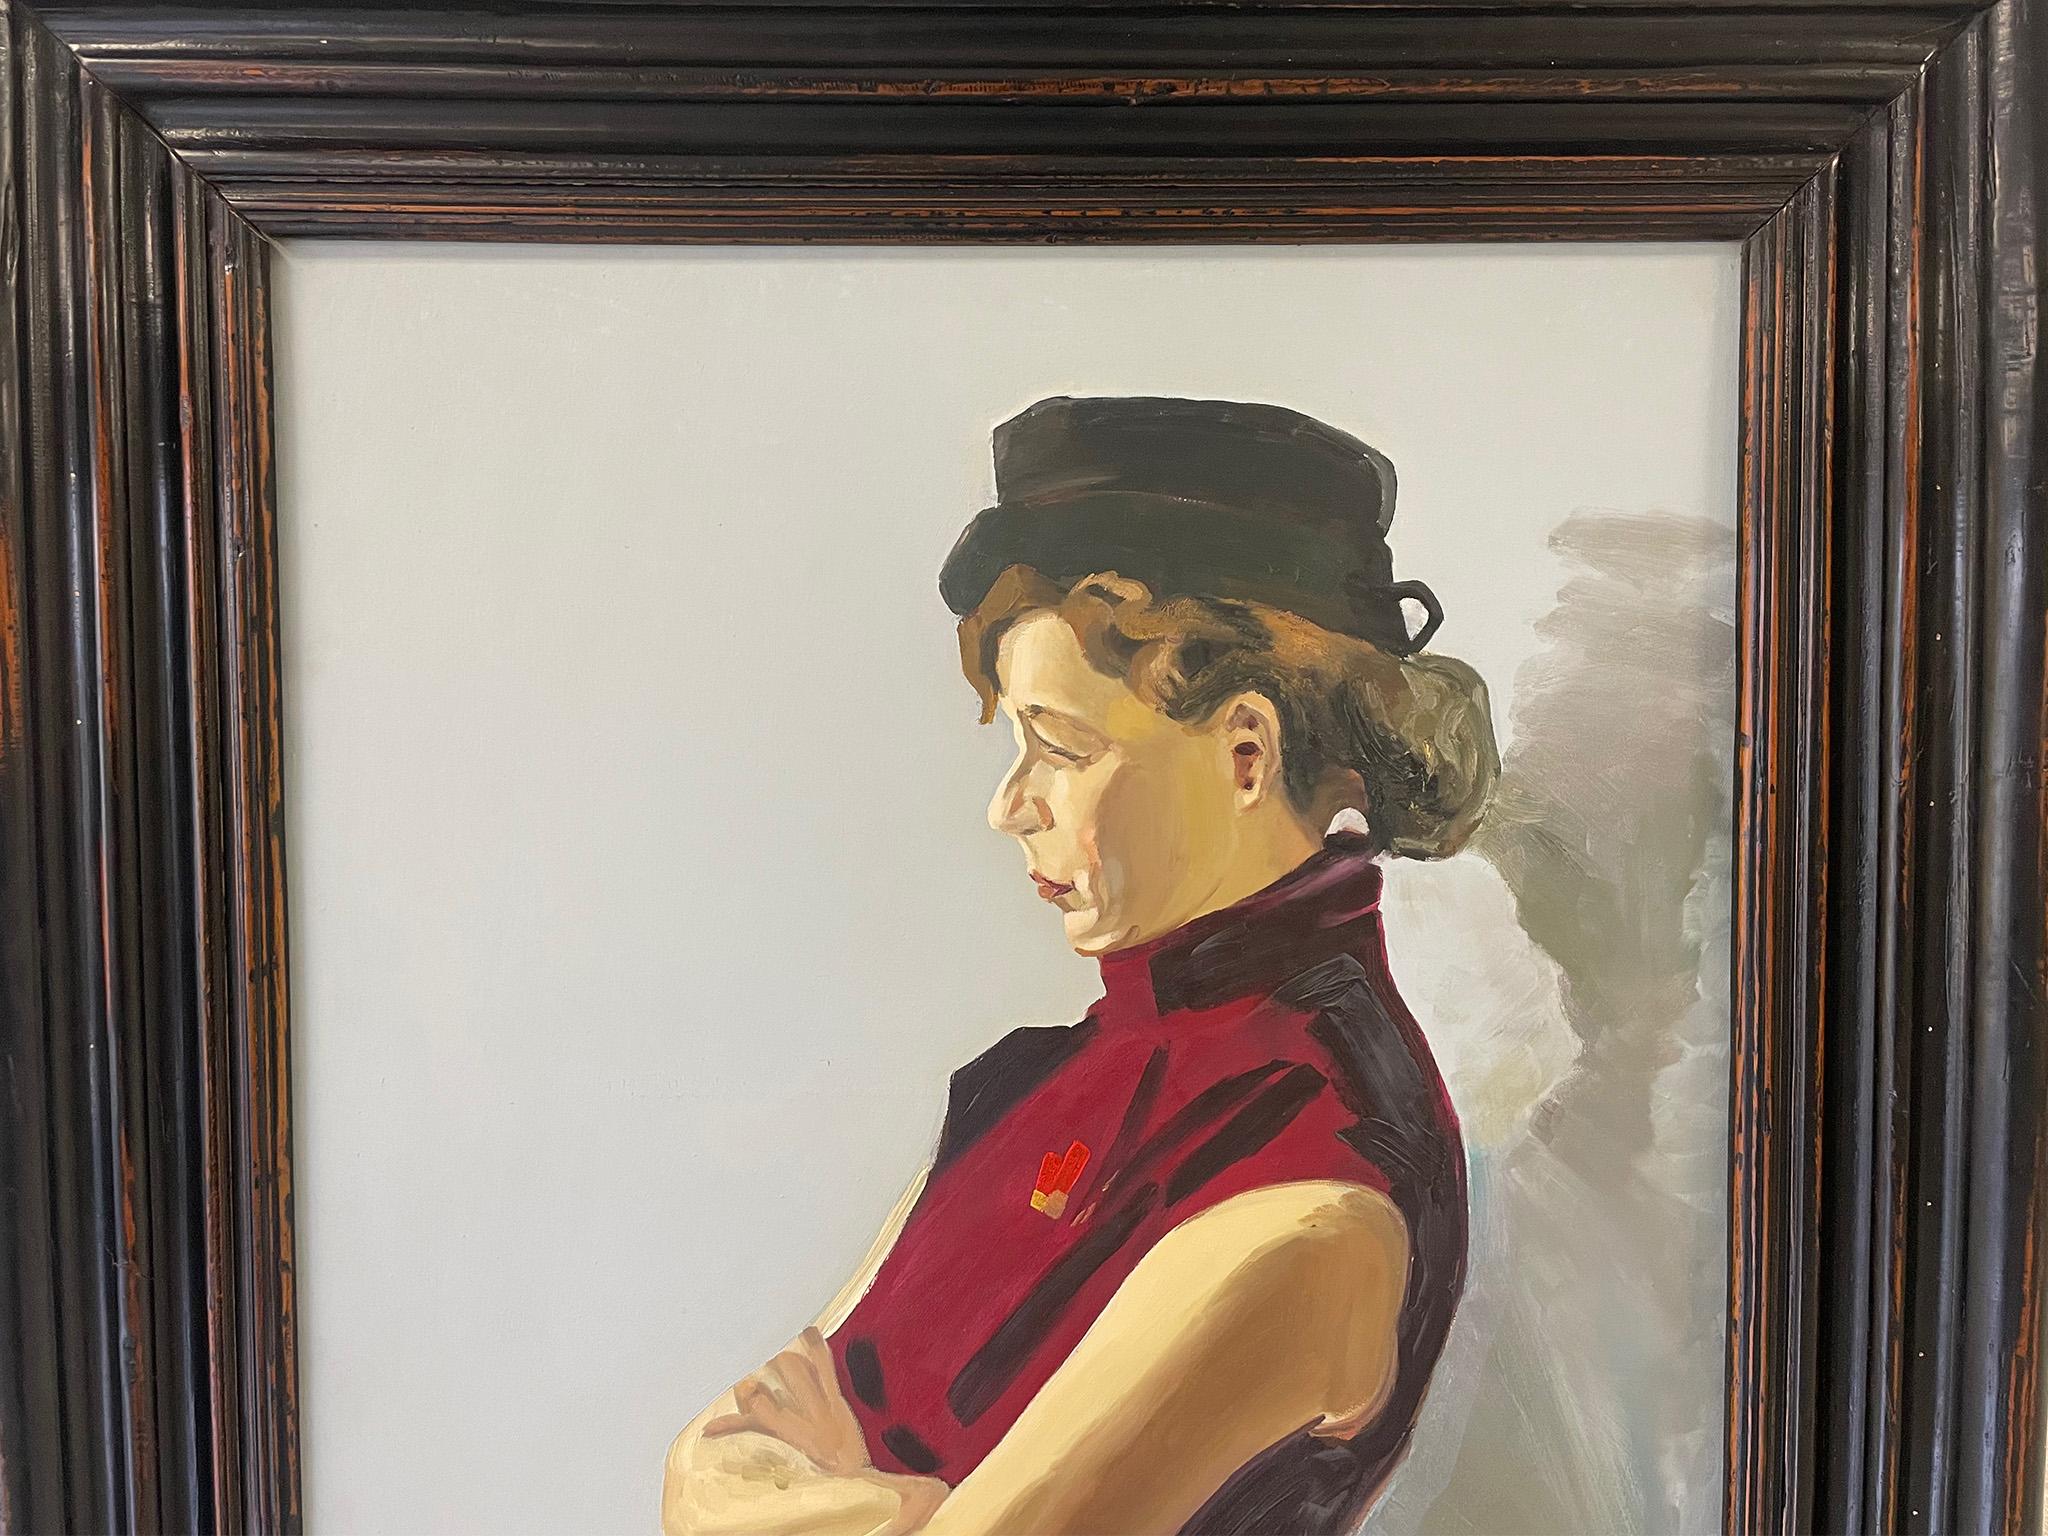 Charming large scale portrait, depicting the side profile of a woman with arms crossed looking off canvas in a sleeveless crimson dress. The painting is held in a sturdy wood frame with intentional antique distressing. The moving label on the back